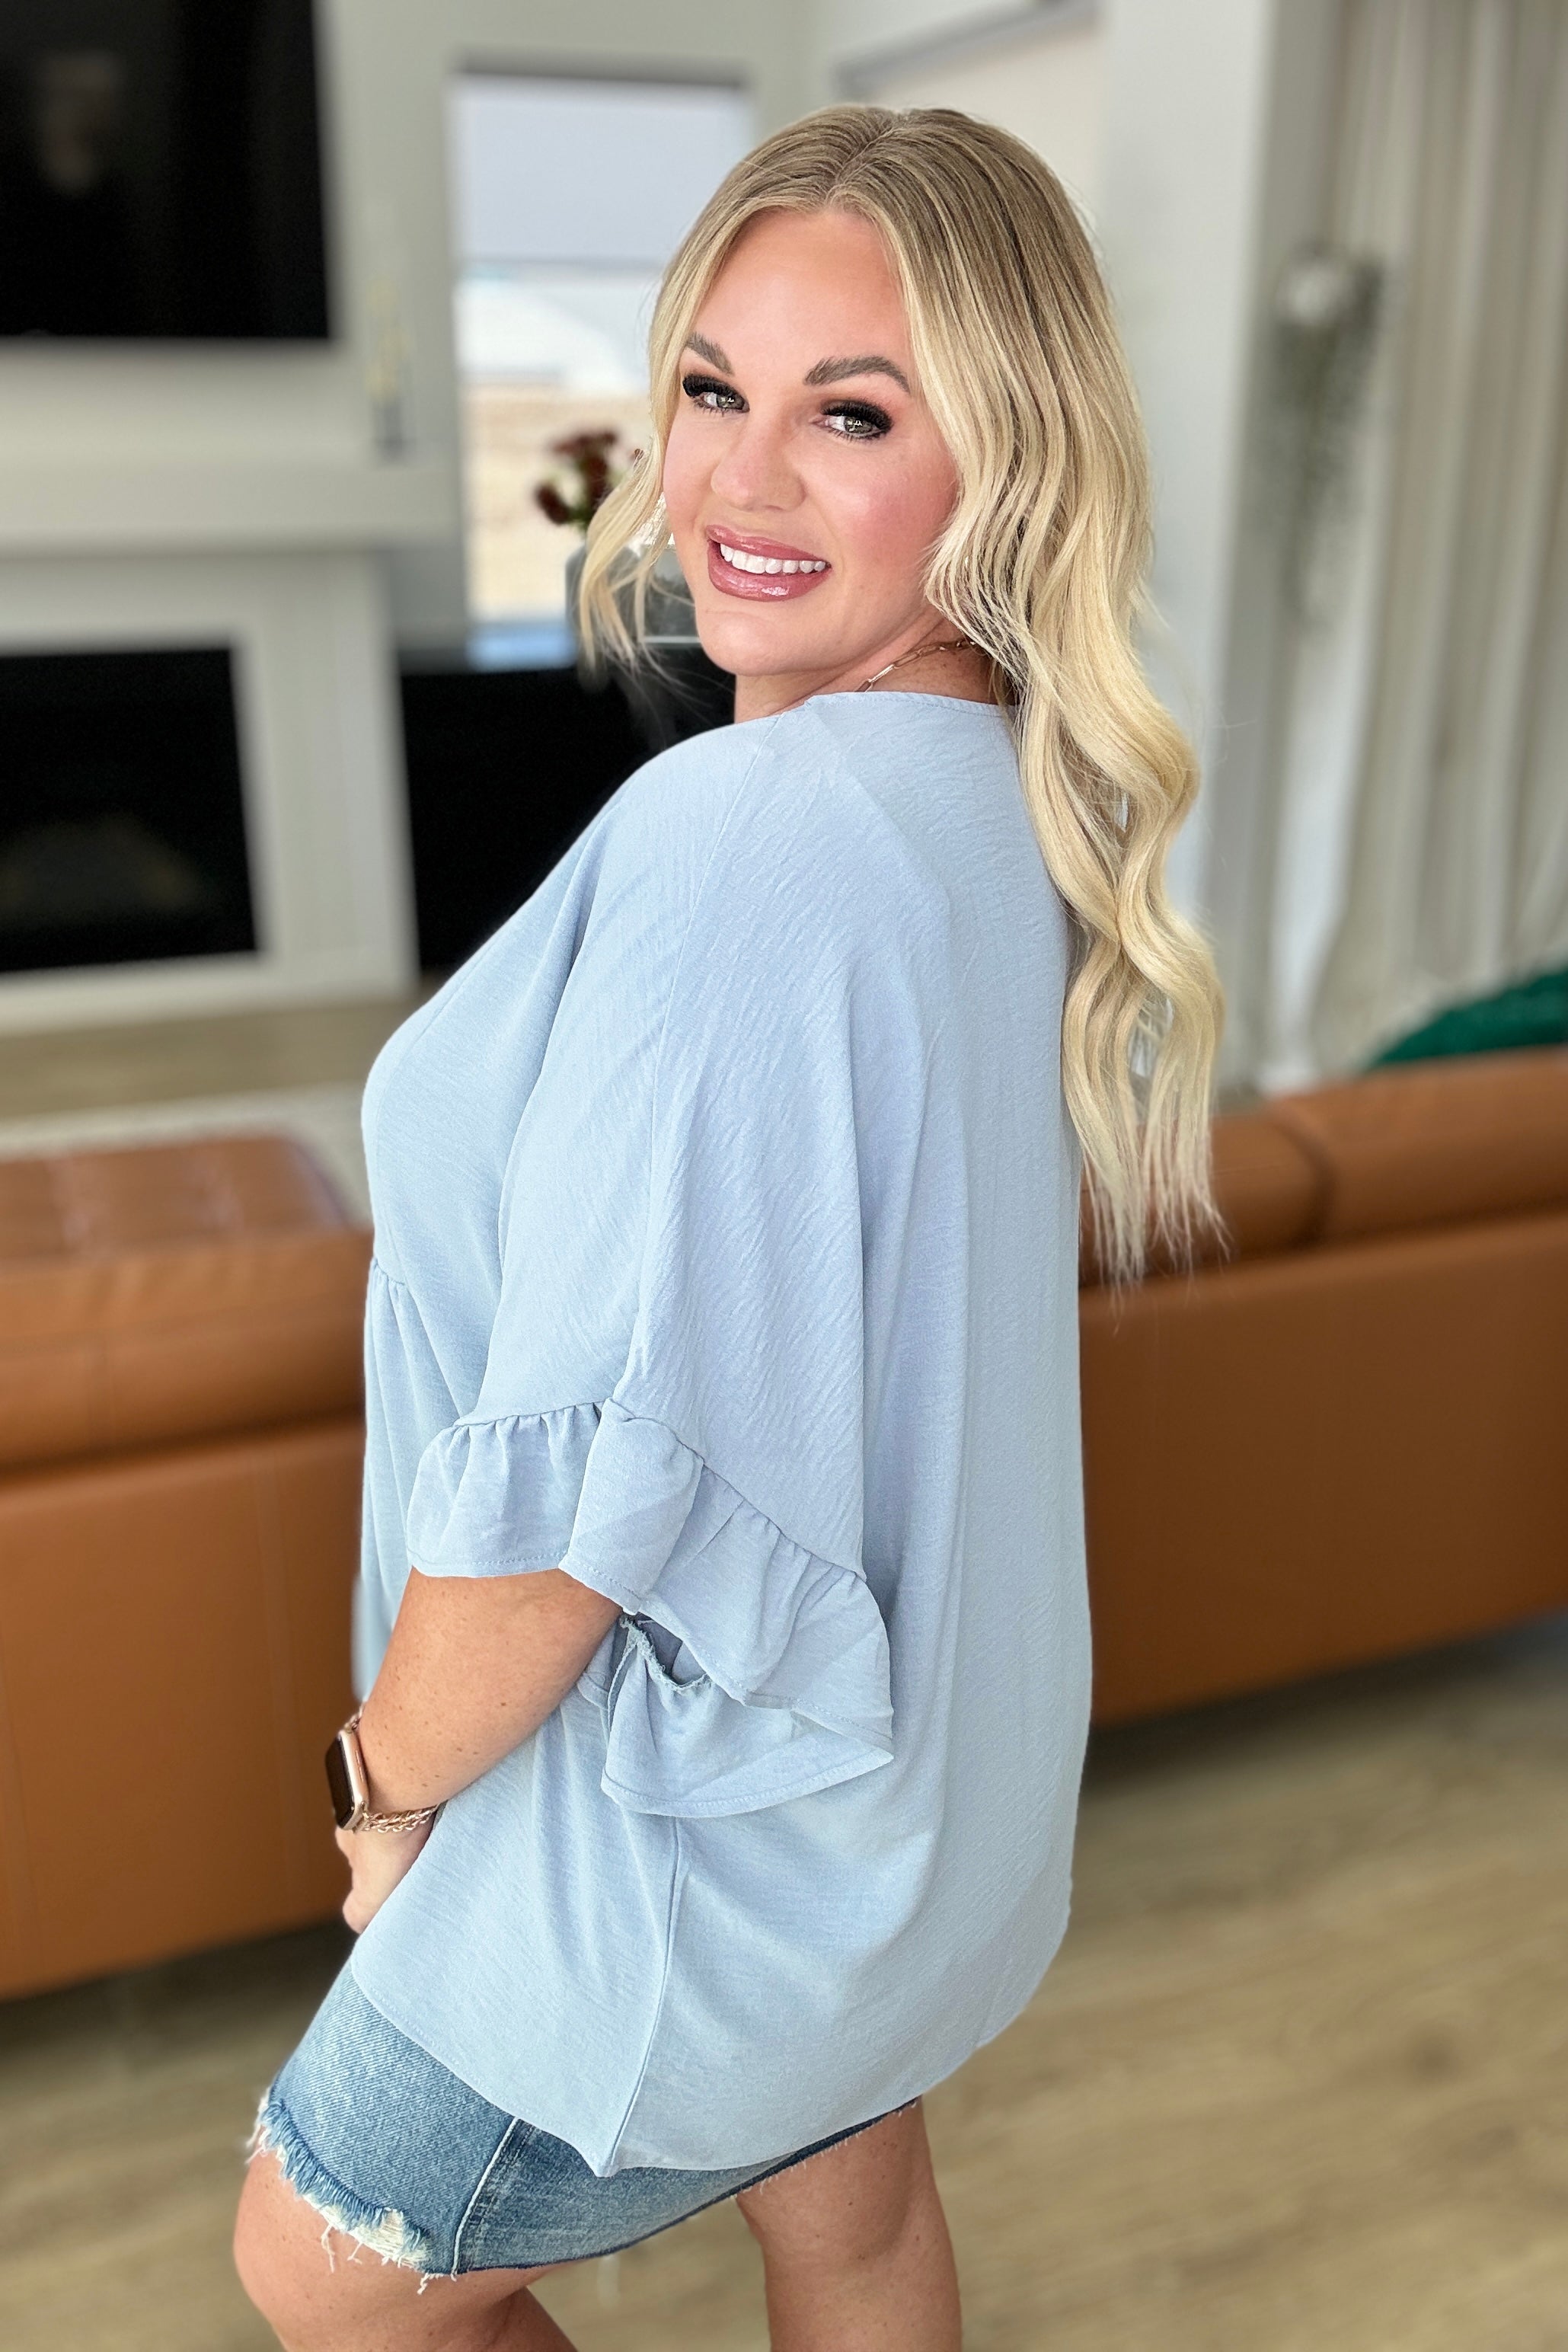 Airflow Peplum Ruffle Sleeve Top in Chambray Tops Ave Shops   